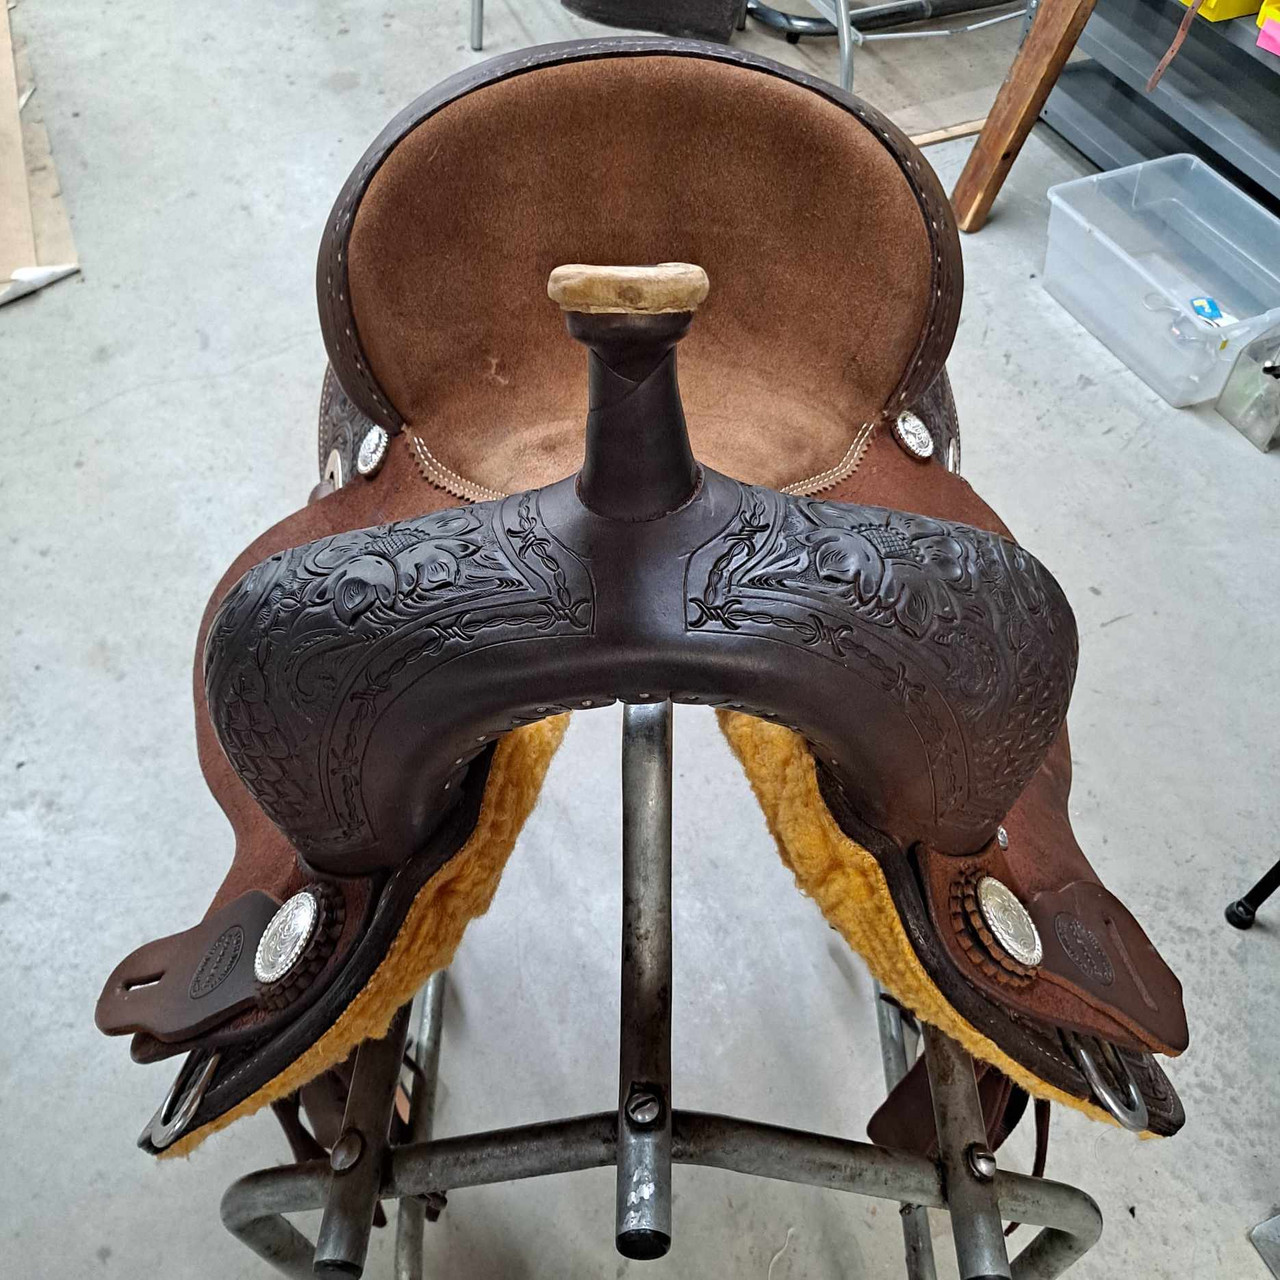 New Ft Worth Competitor Barrel Saddle by Fort Worth Saddle Co with 13.5 inch seat. S1651